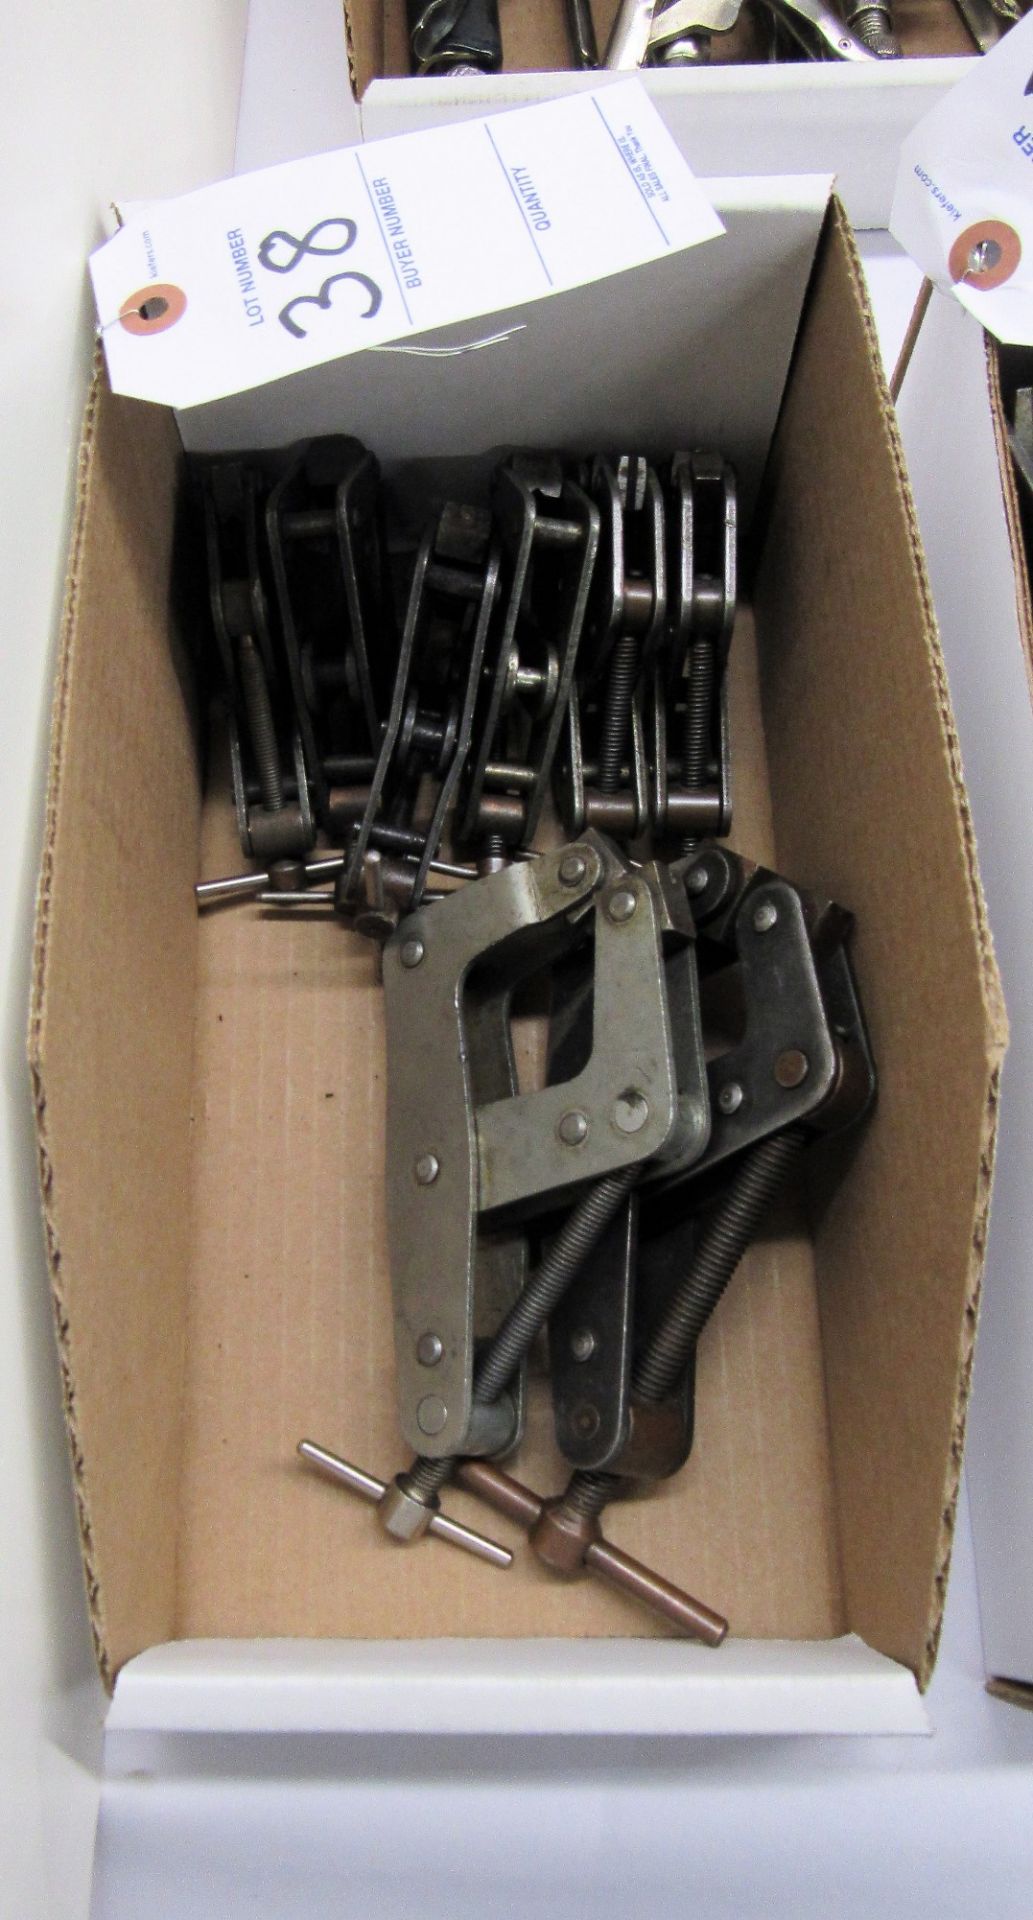 (2) 3" Kant Twist Clamps & (6) 2" Kant Twist Clamps